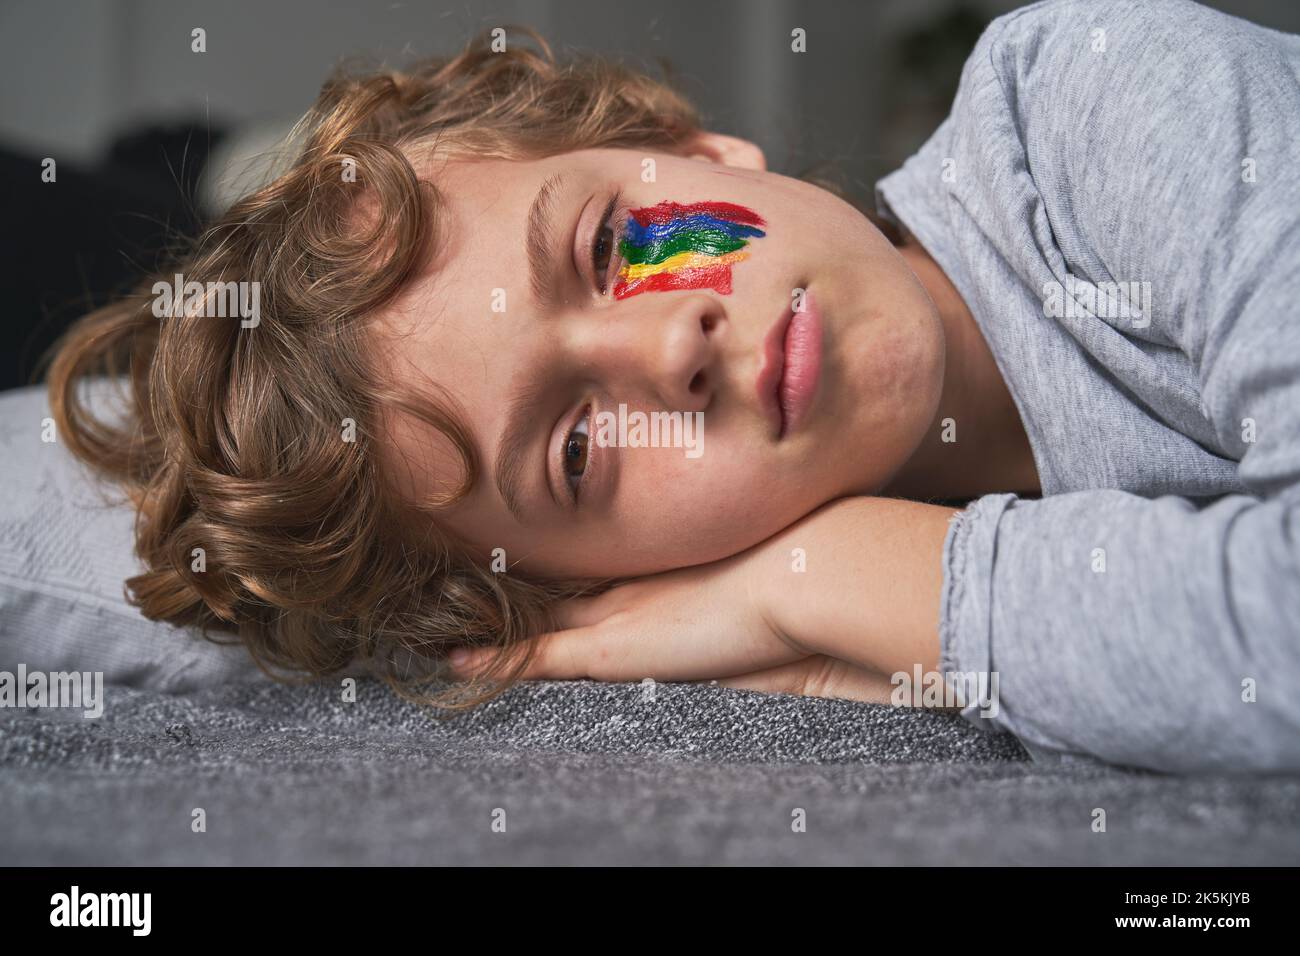 Unemotional boy with rainbow painted under eye lying on floor Stock Photo